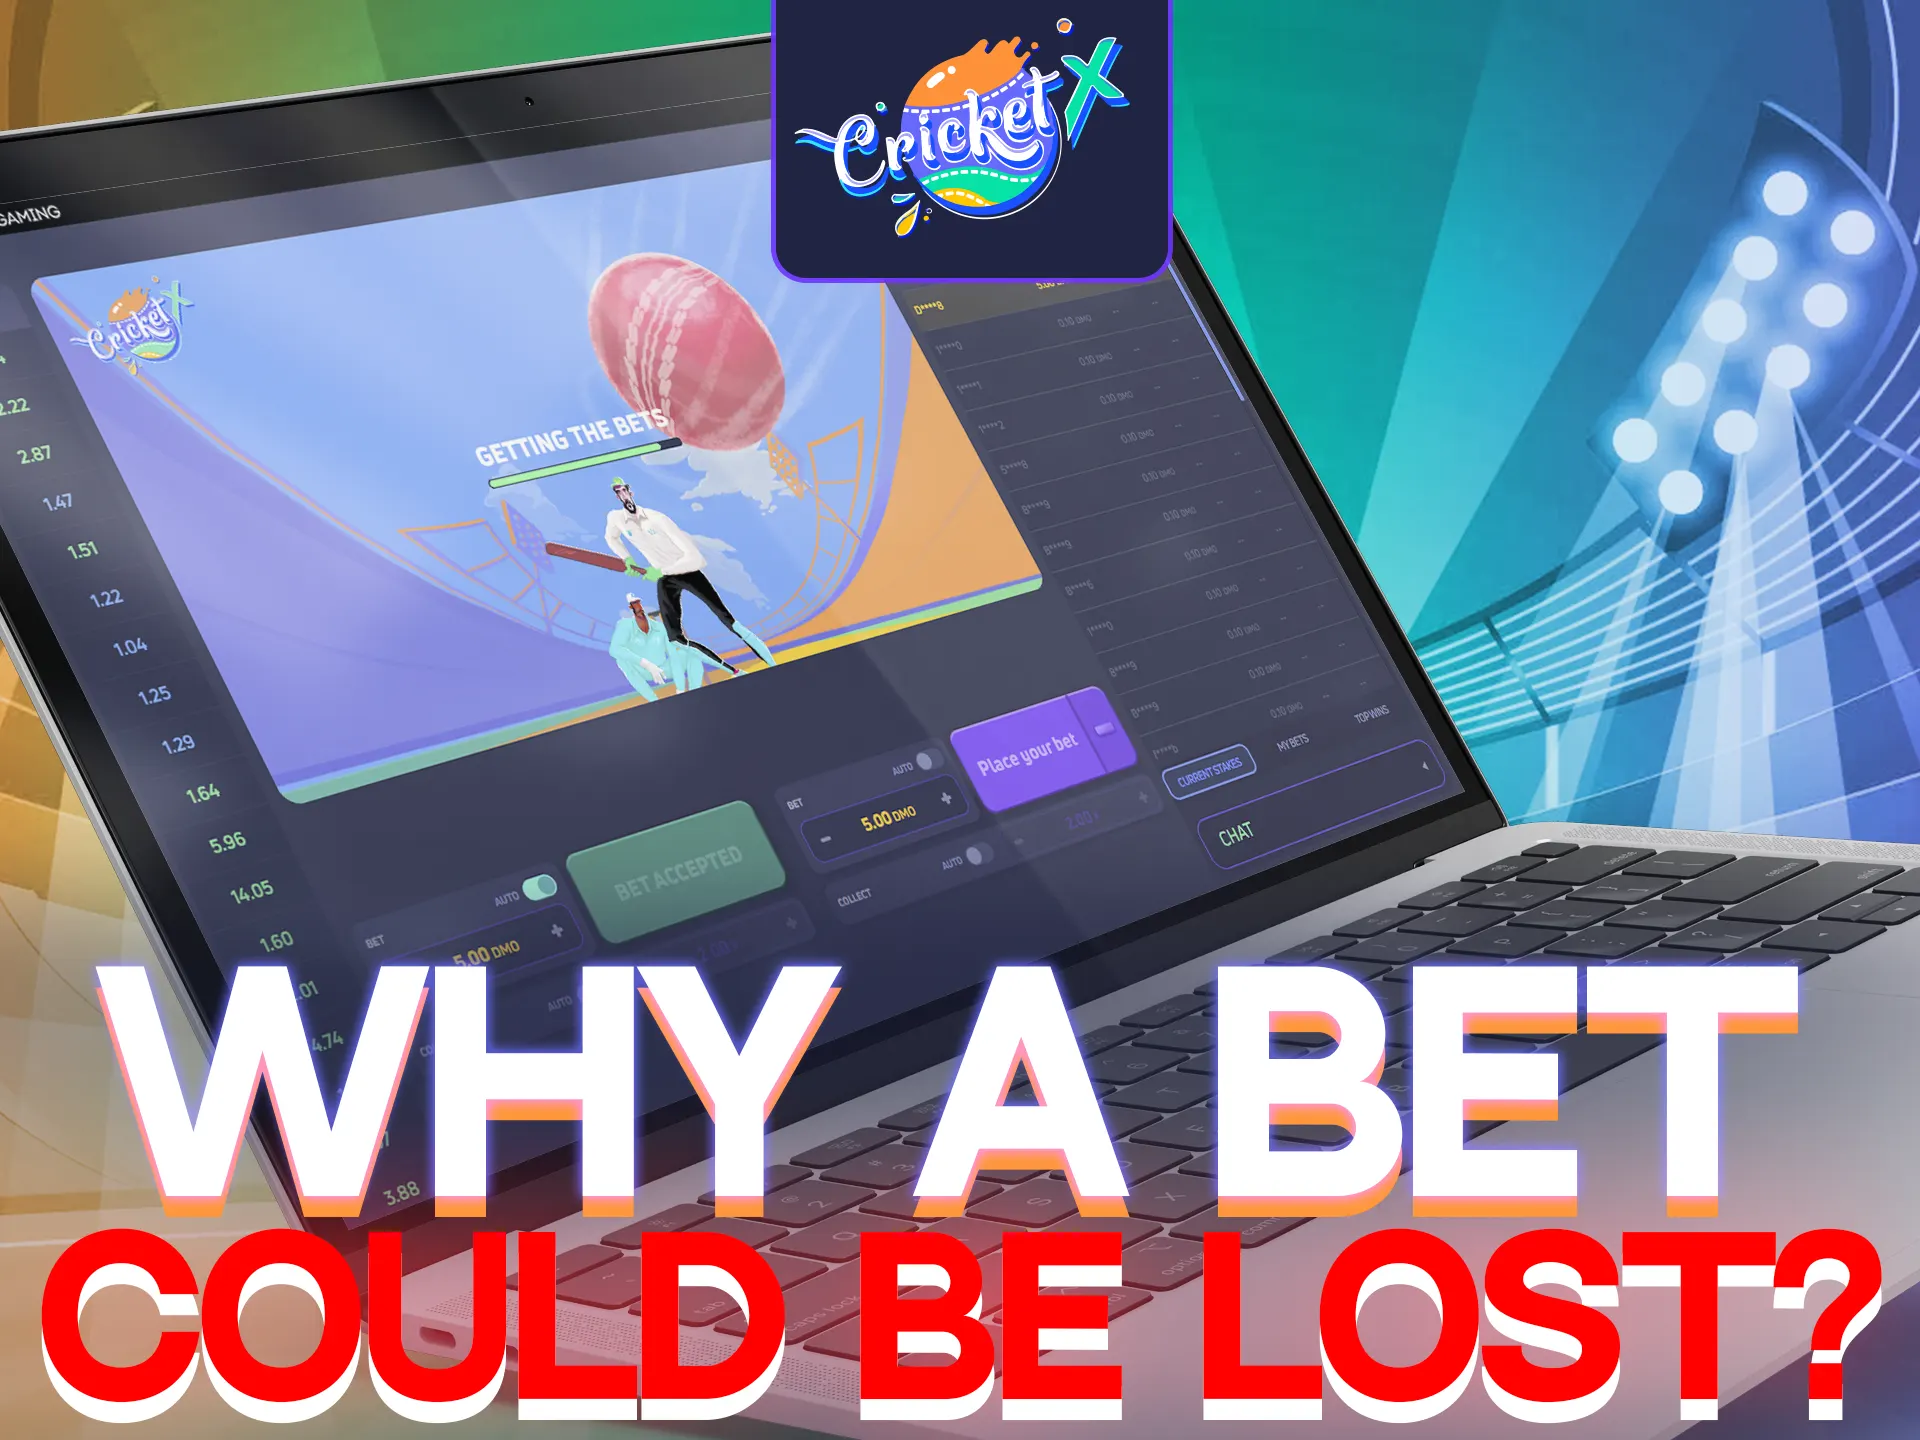 Avoid losing Cricket X bets: Don't cash out after ball collapse or miss multiplier cues.